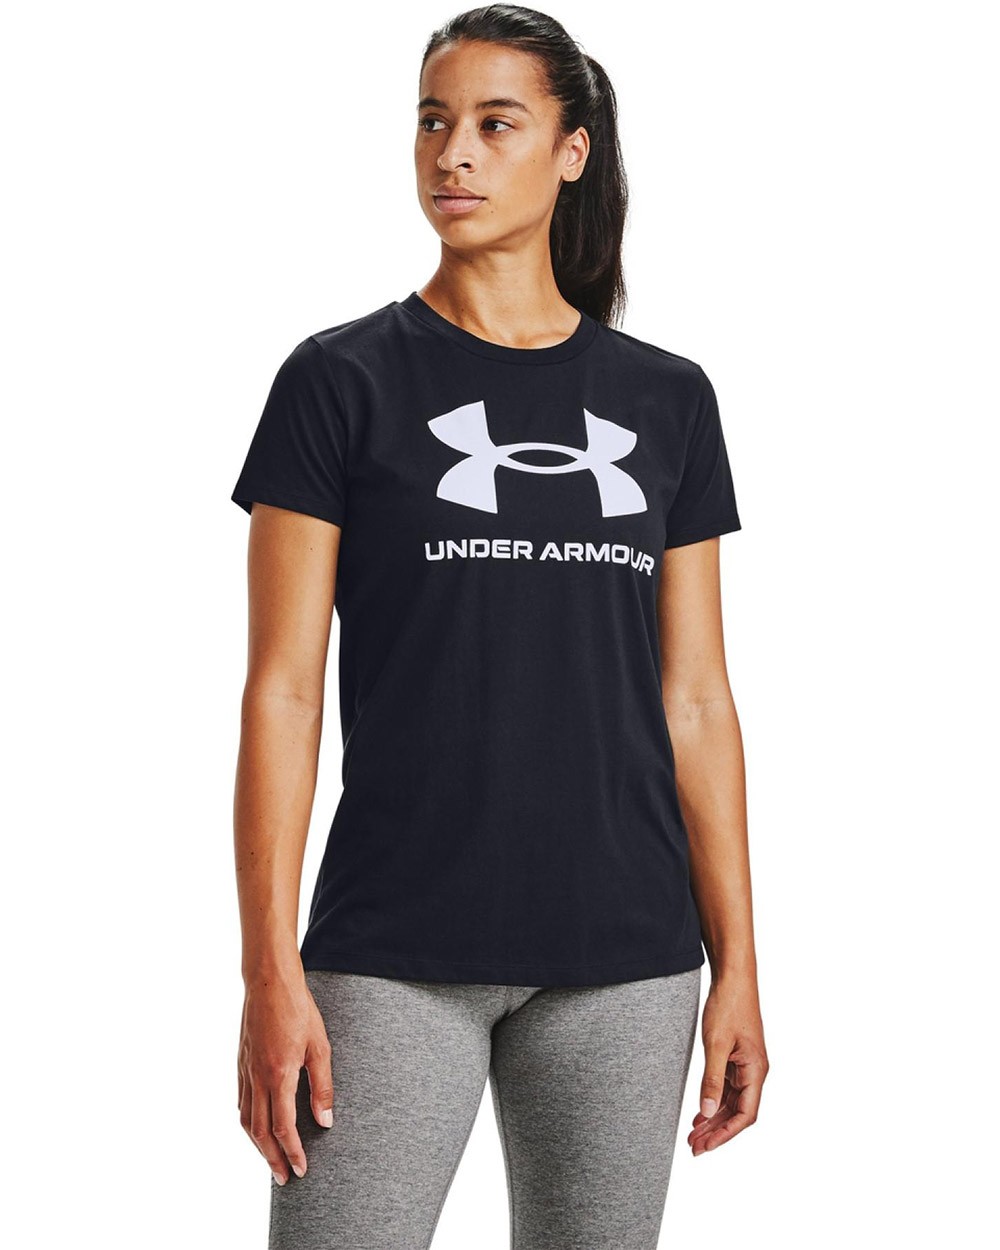 UNDER ARMOR Sportstyle Graphic - T-shirt